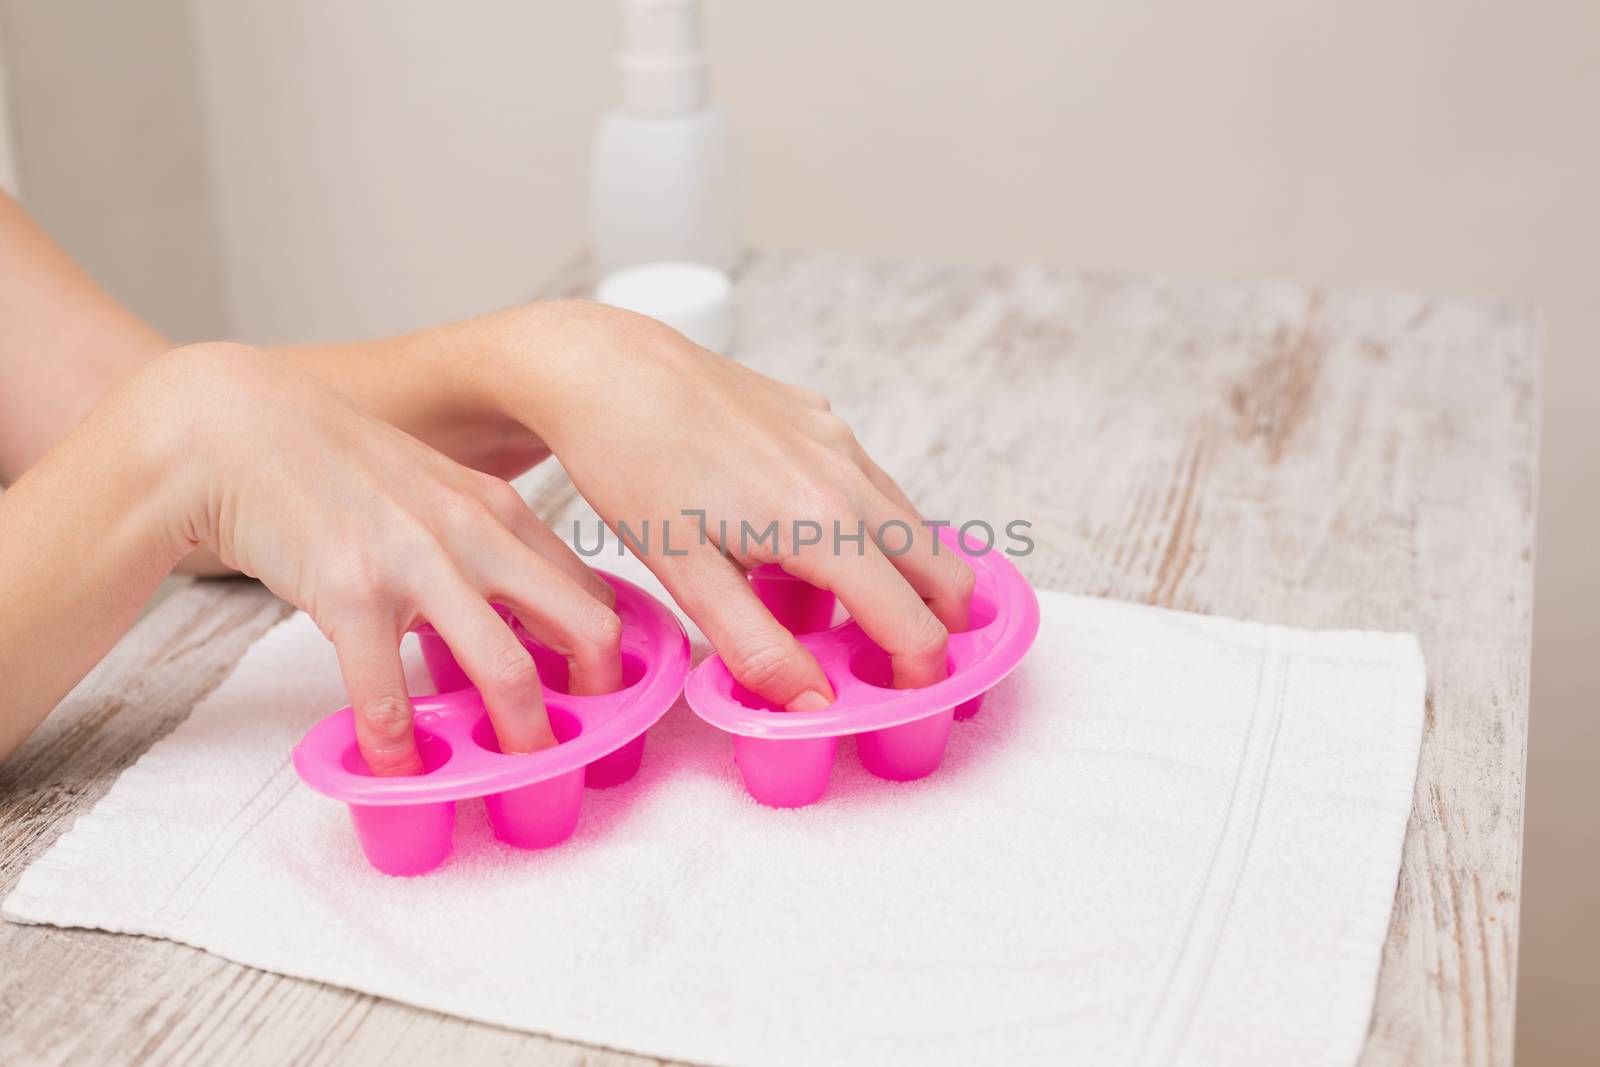 Woman soaking her nails in nail bowls by Wavebreakmedia